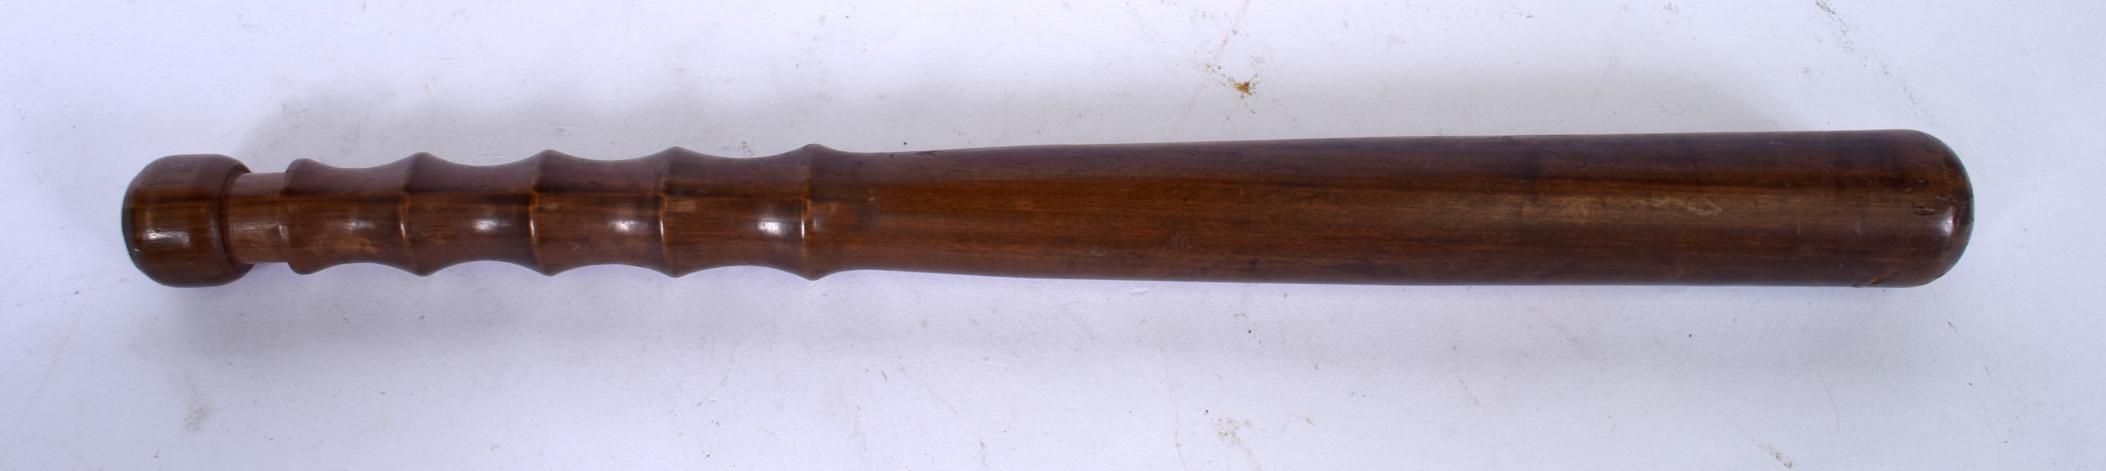 AN ANTIQUE FRUITWOOD TRUNCHEON, with carved rib handle. 39.5 cm long.